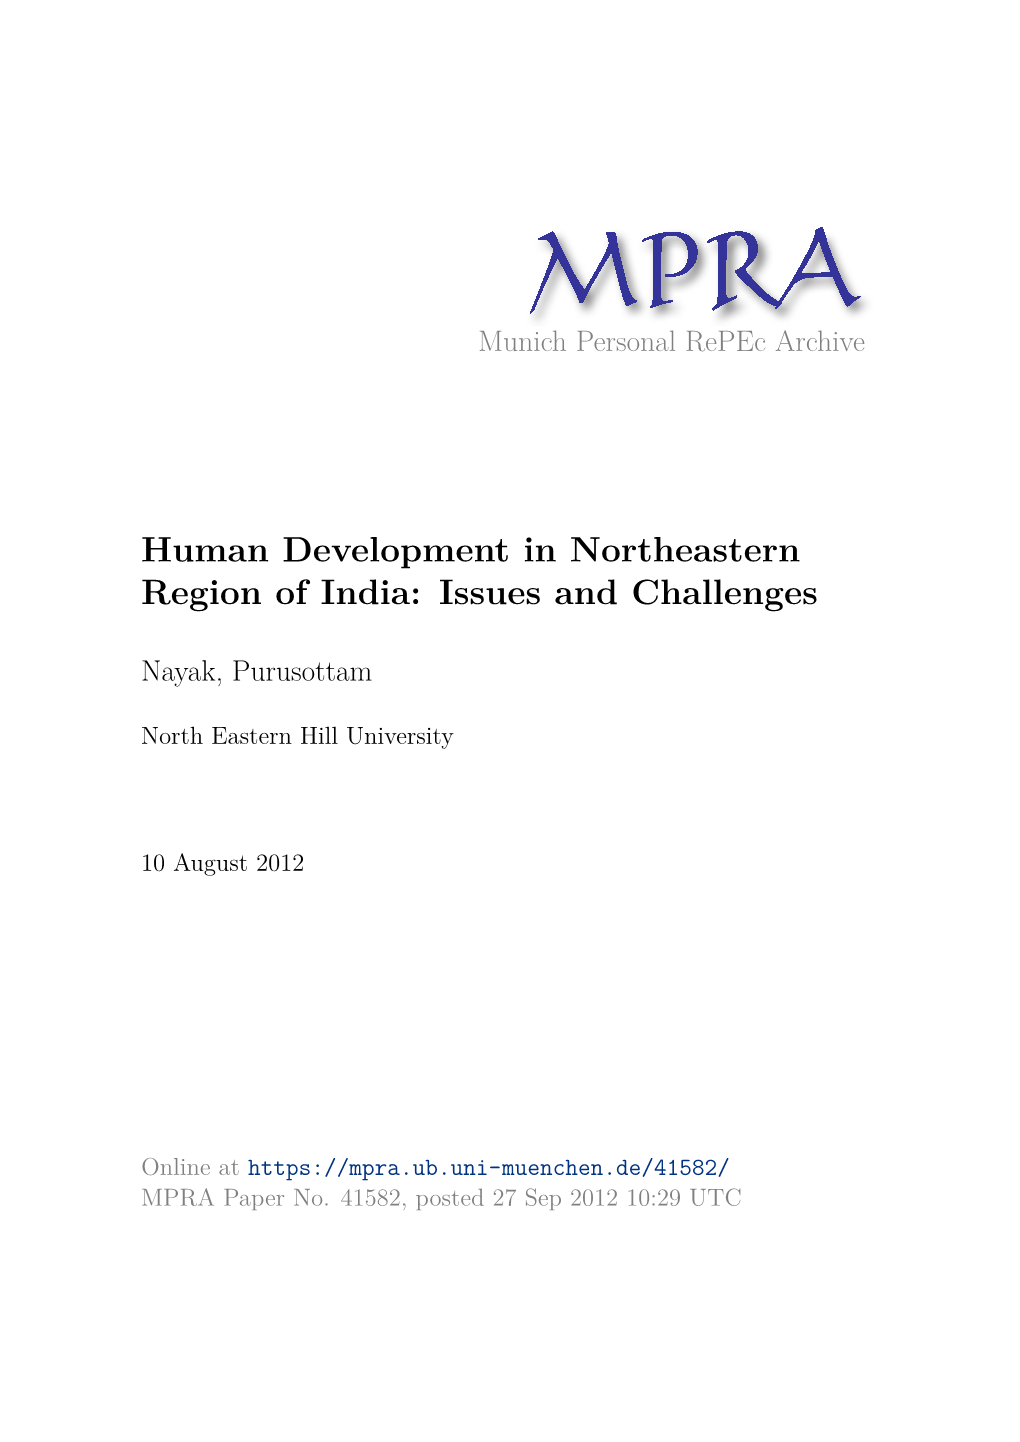 Human Development in Northeastern Region of India: Issues and Challenges